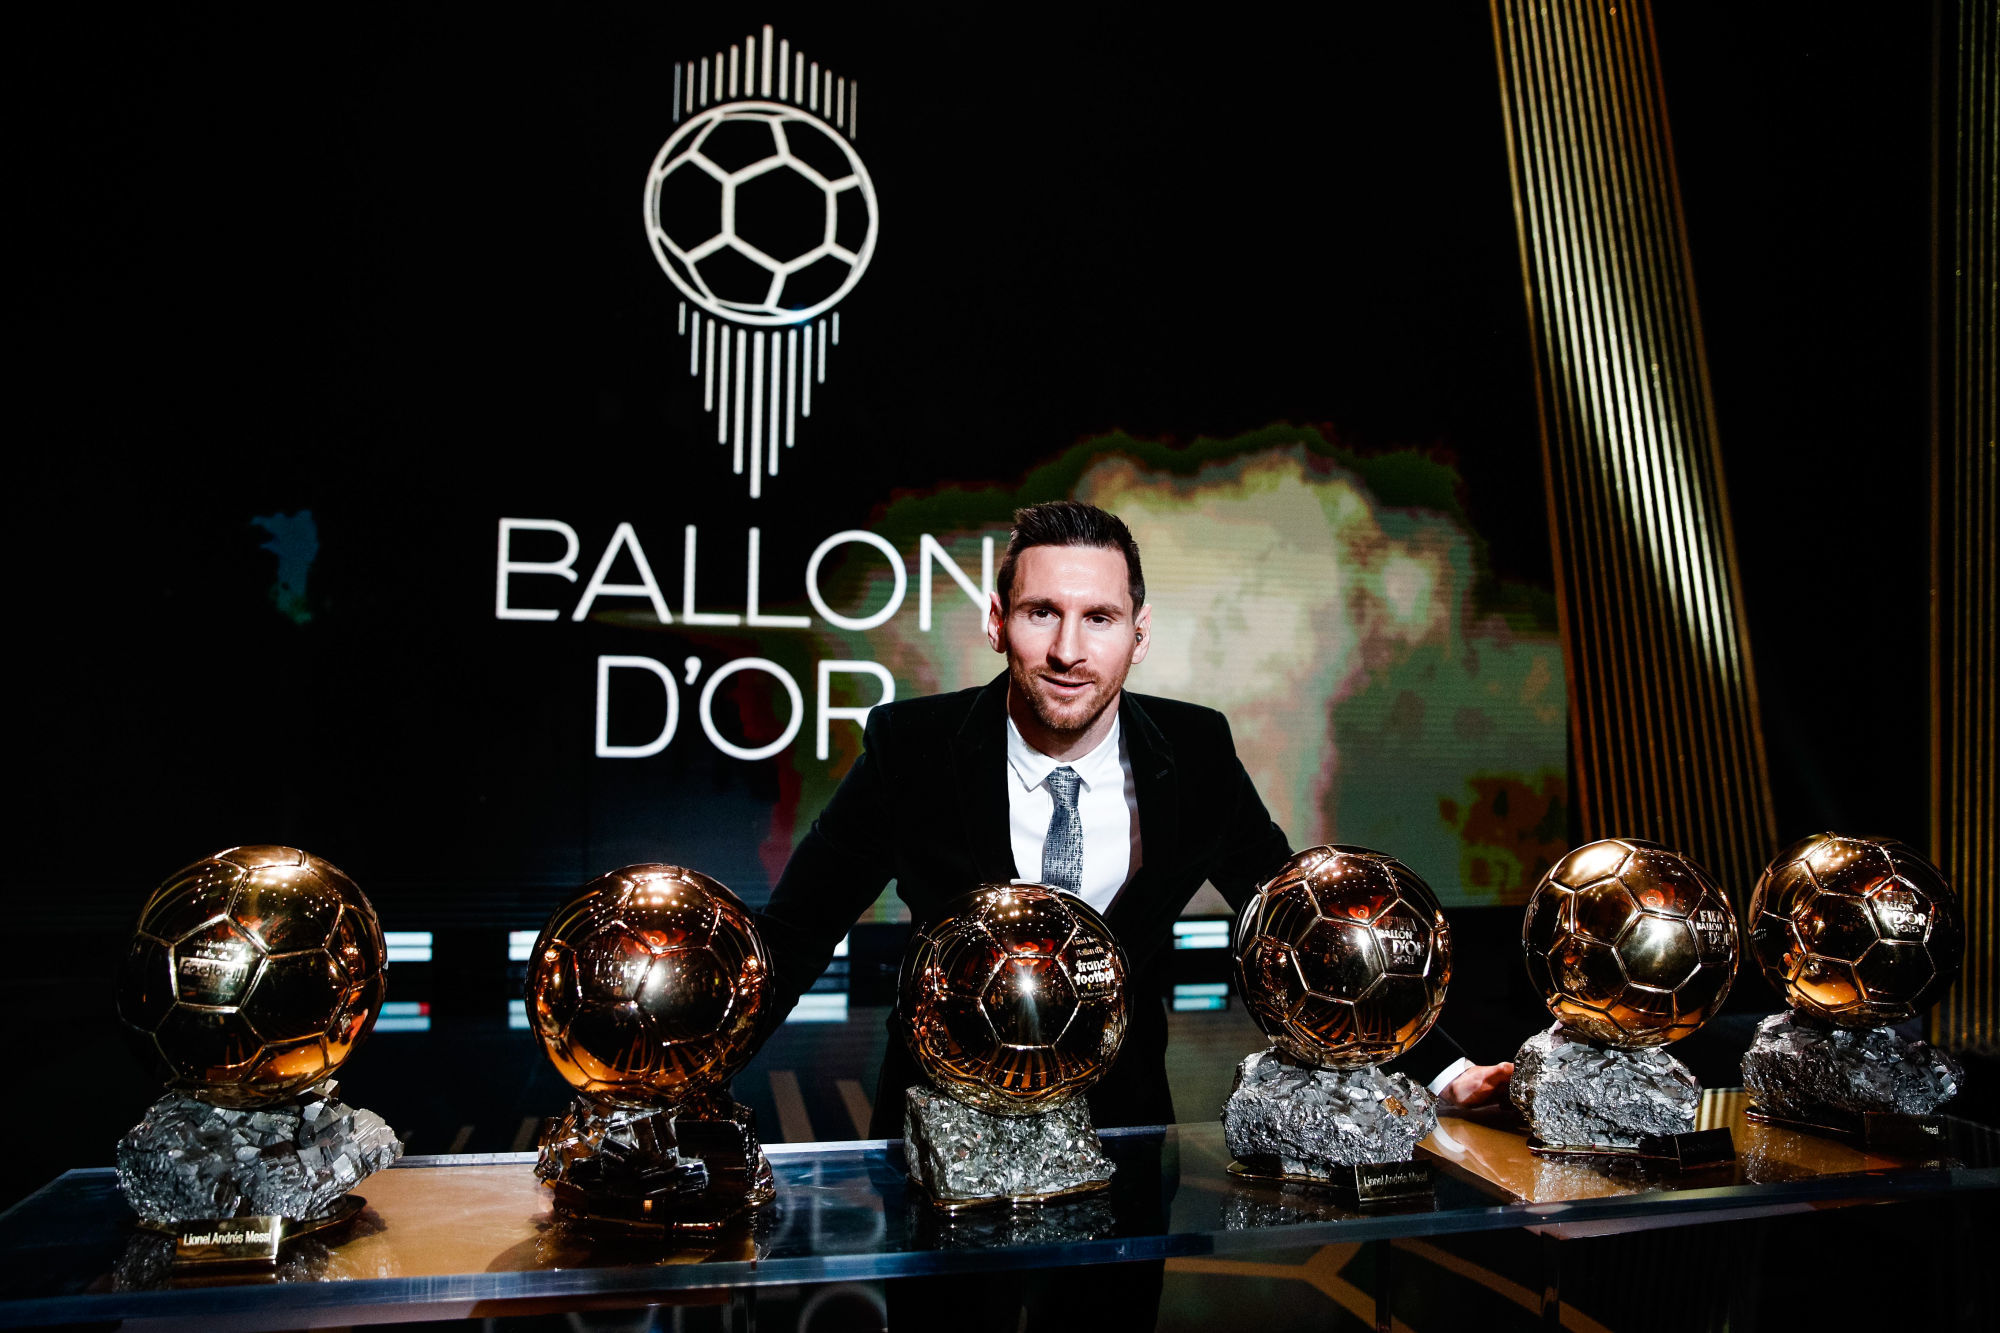 (191203) -- BEIJING, Dec. 3, 2019 (Xinhua) -- The Men's 2019 Ballon d'Or winner Barcelona forward Lionel Messi poses with his six Ballon d'Or trophies he won in his career so far during the ceremony at the Theatre du Chatelet in Paris, France, Dec. 2, 2019. (Photo by Aurelien Morissard/Xinhua) (Photo by Xinhua/Sipa USA) 

Photo by Icon Sport - Theatre du Chatelet - Paris (France)